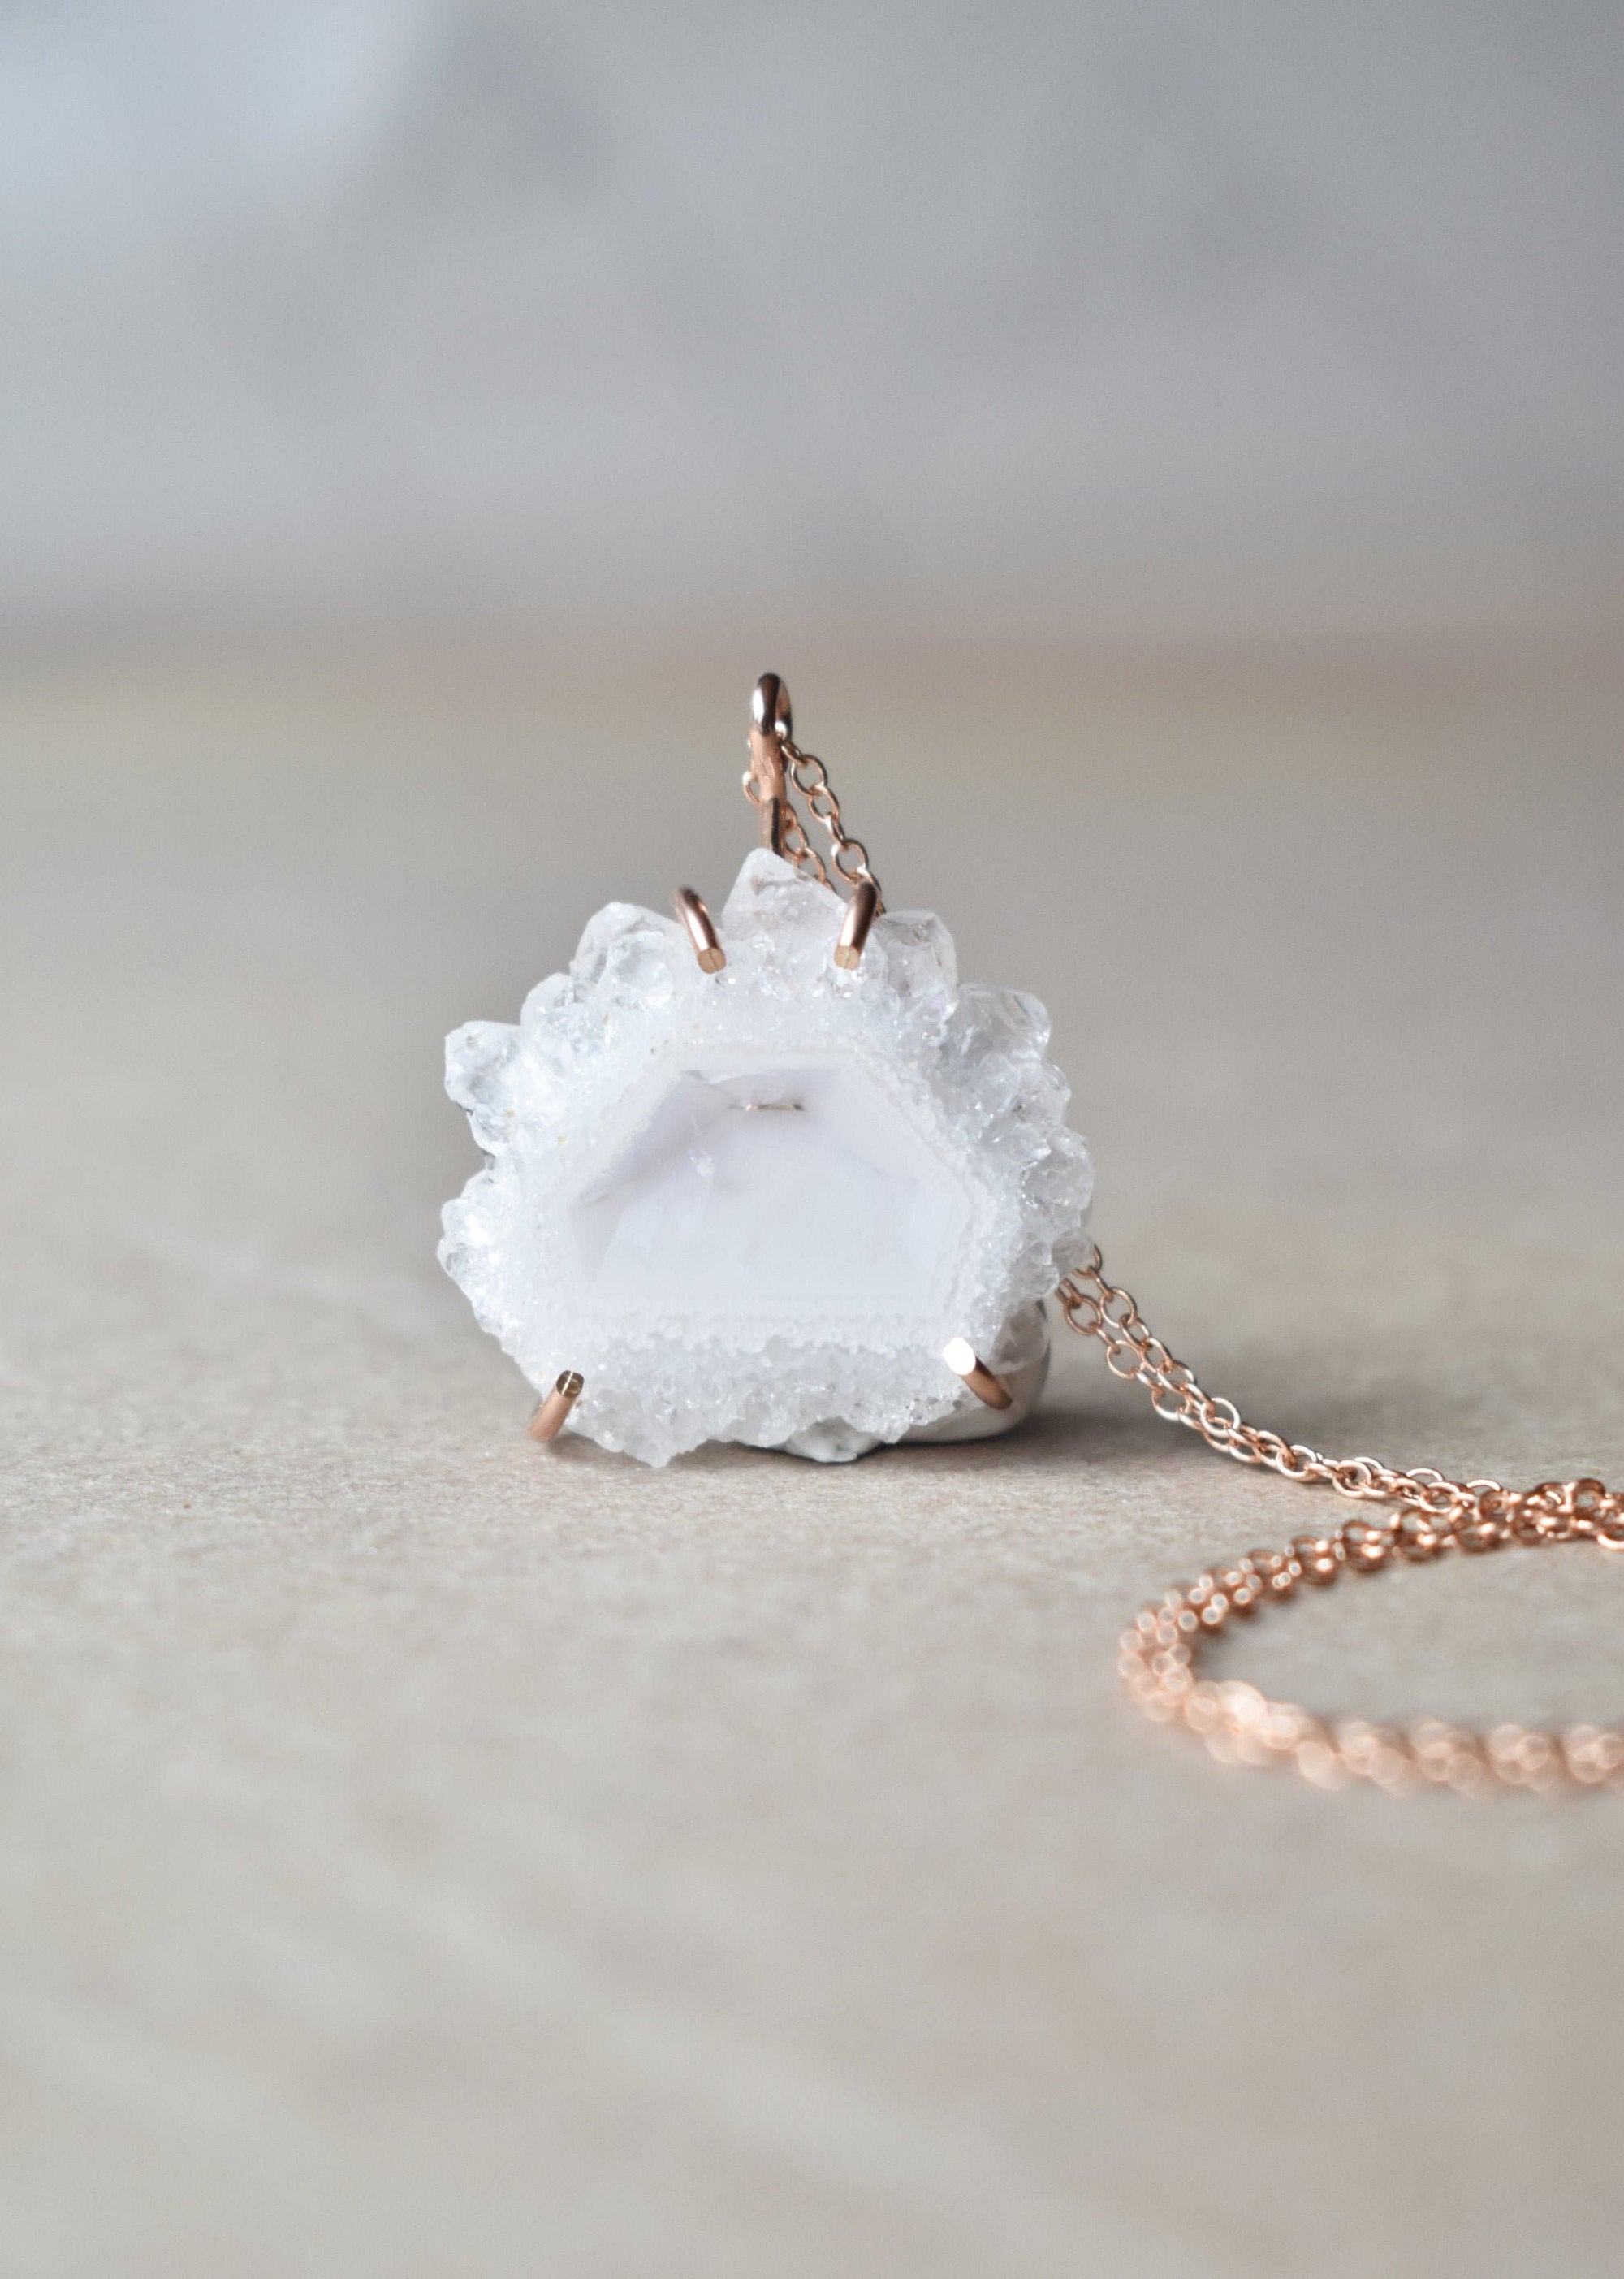 White Quartz Crystal Pendant Necklace in Rose Gold, Snow White and Rose Gold, White Outfit Jewelry with a Shadowbox Crystal Quartz Slice